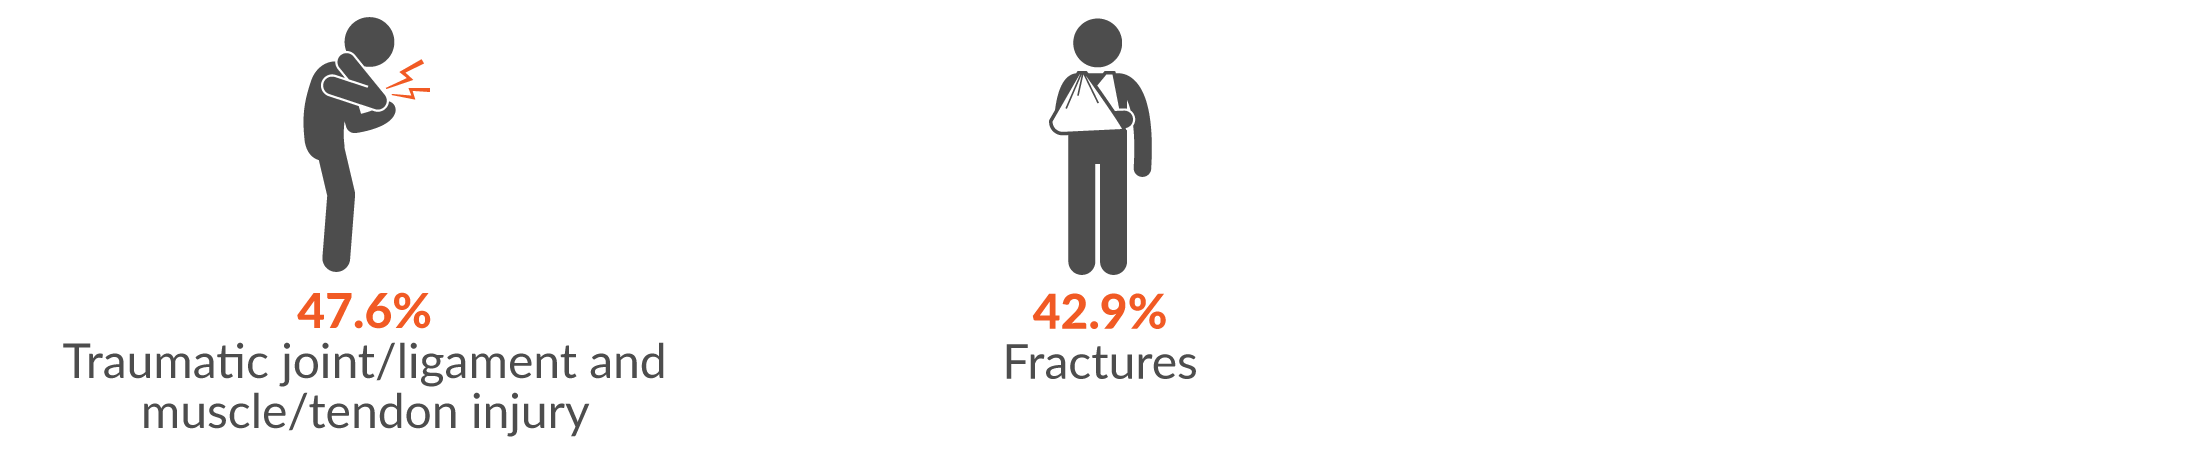 This infographic shows the main two injury groups resulting from falls, trips and slips of a person were 47.1% traumatic joint/ligament and muscle/tendon injury; and 41.2% fractures.